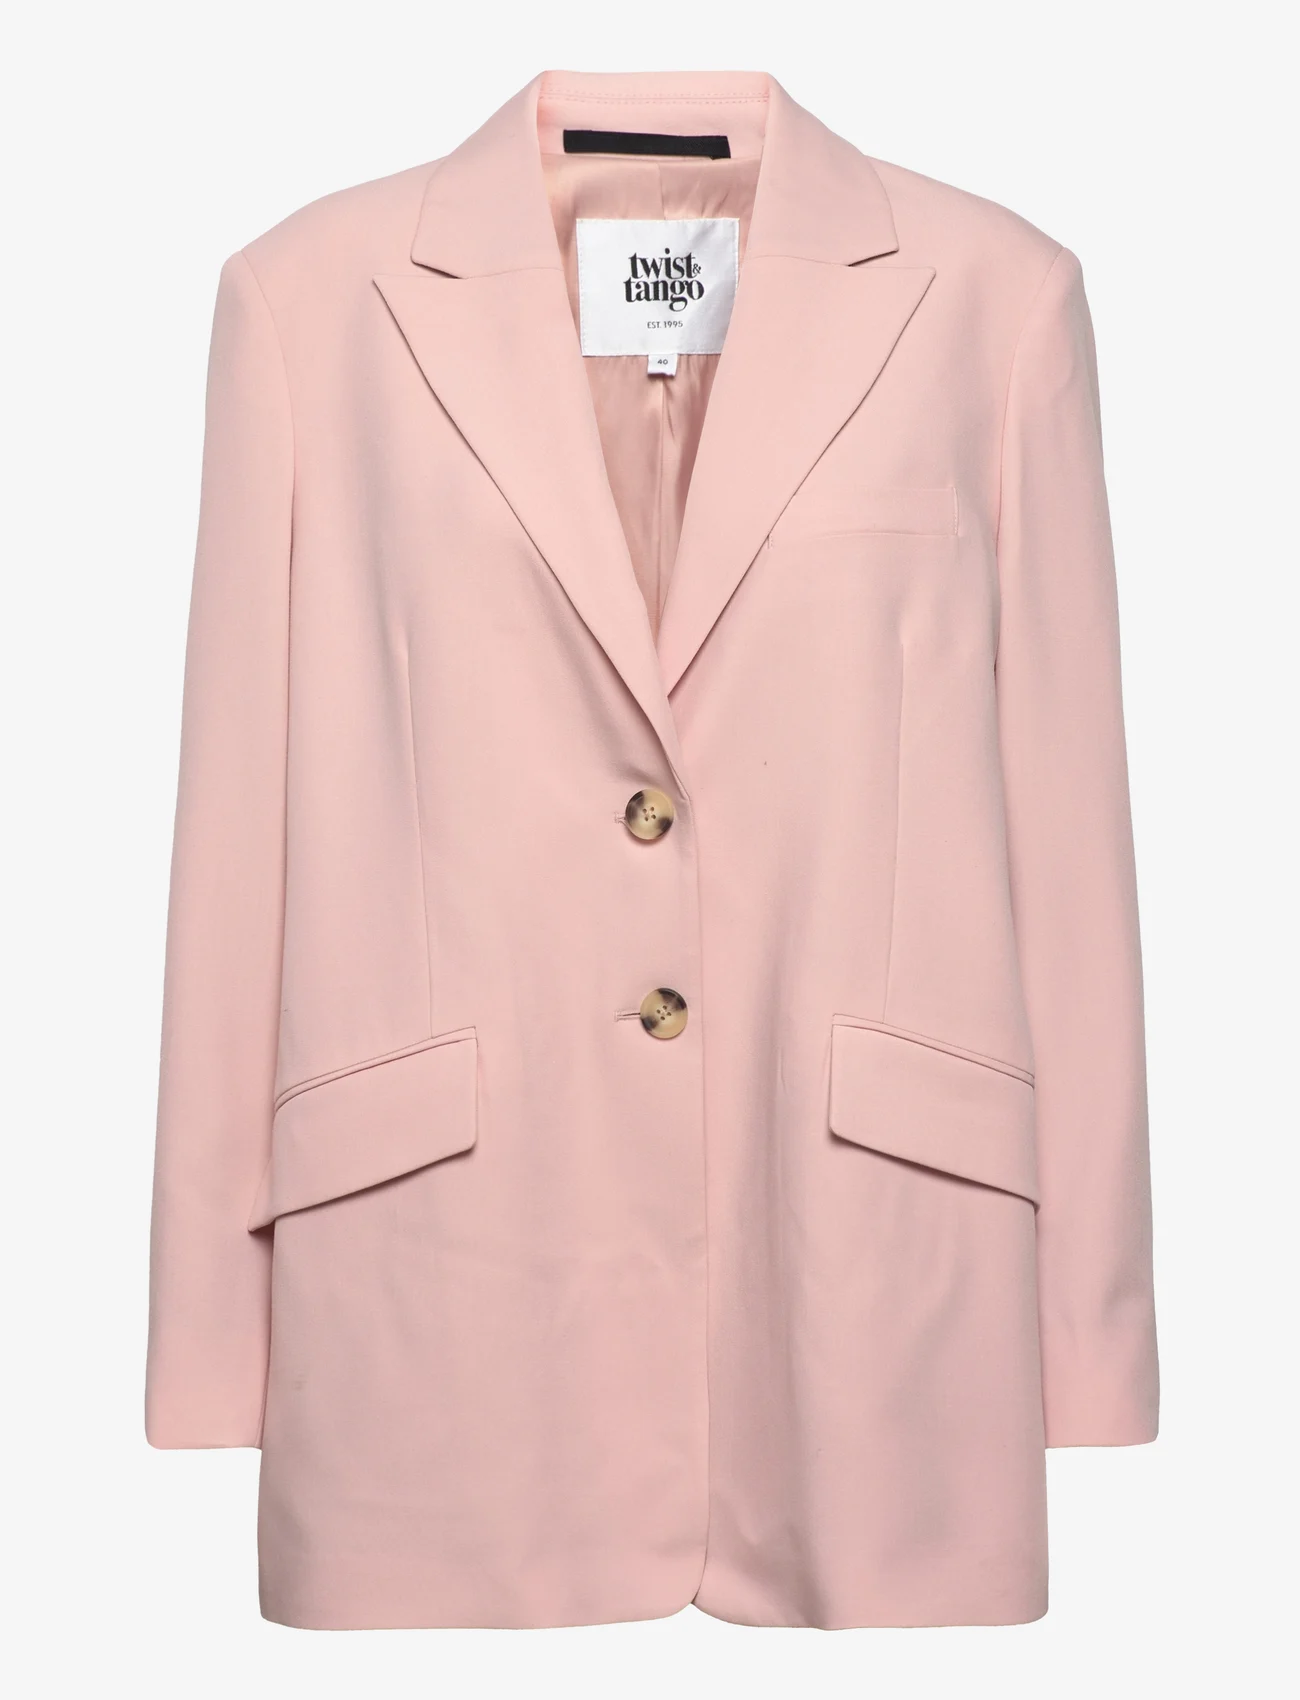 Twist & Tango - Bailey Blazer - party wear at outlet prices - chalked pink - 0